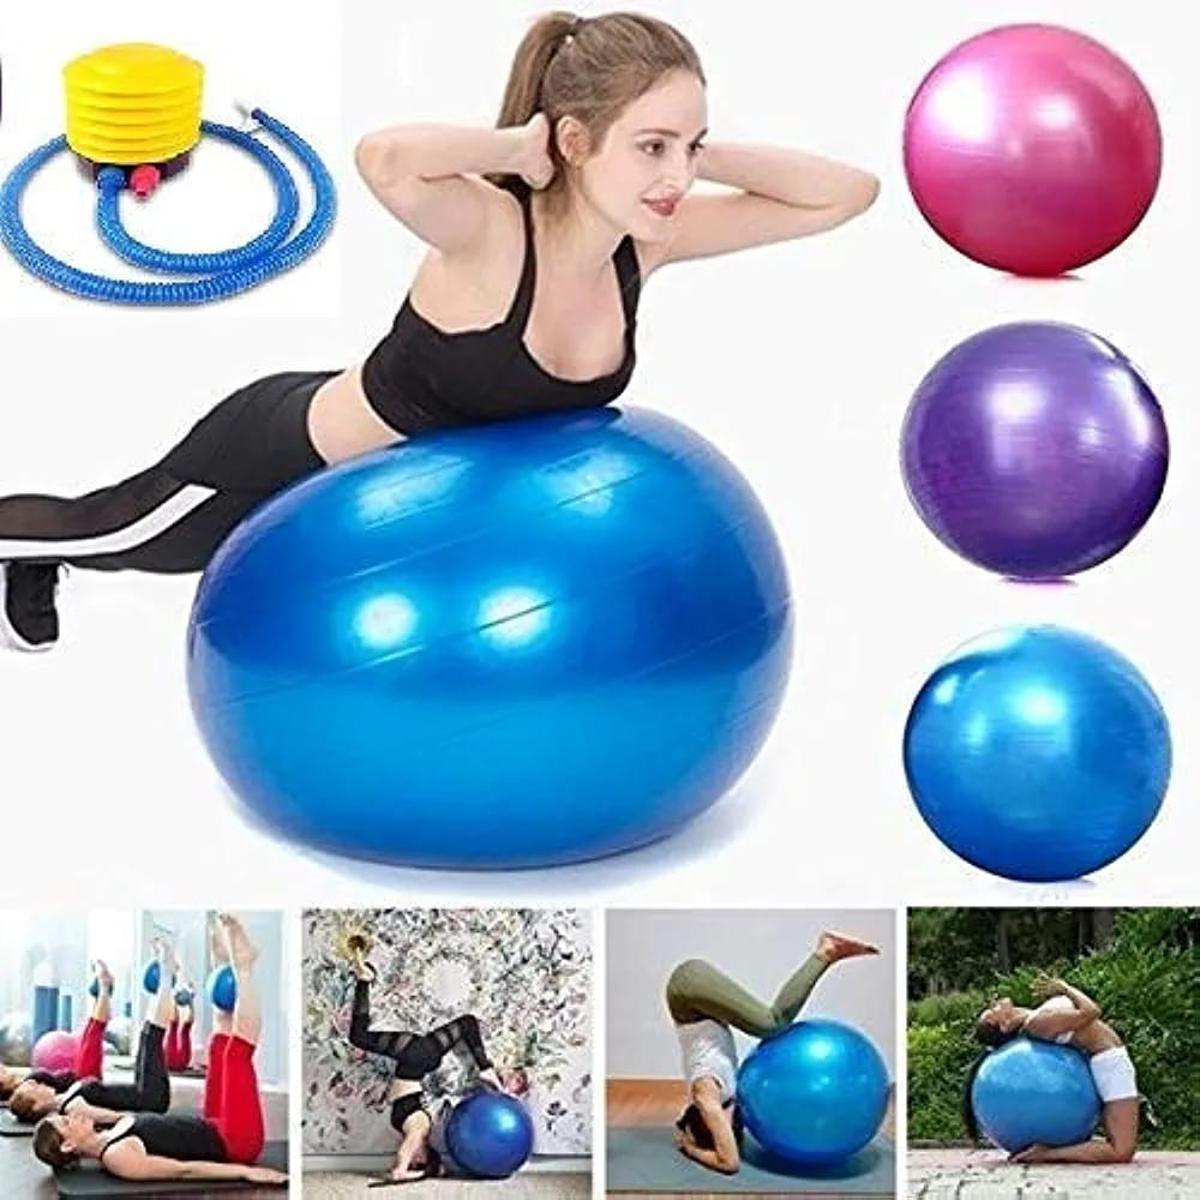 Dxent Multi Use Yoga Ball- Anti Burst 75 cm Exercise Ball with Inflation  Pump, Non-Slip Gym Ball, for Yoga, Pilates, Core Training Exercises at Home  and Gym- Suitable for Men and Women [